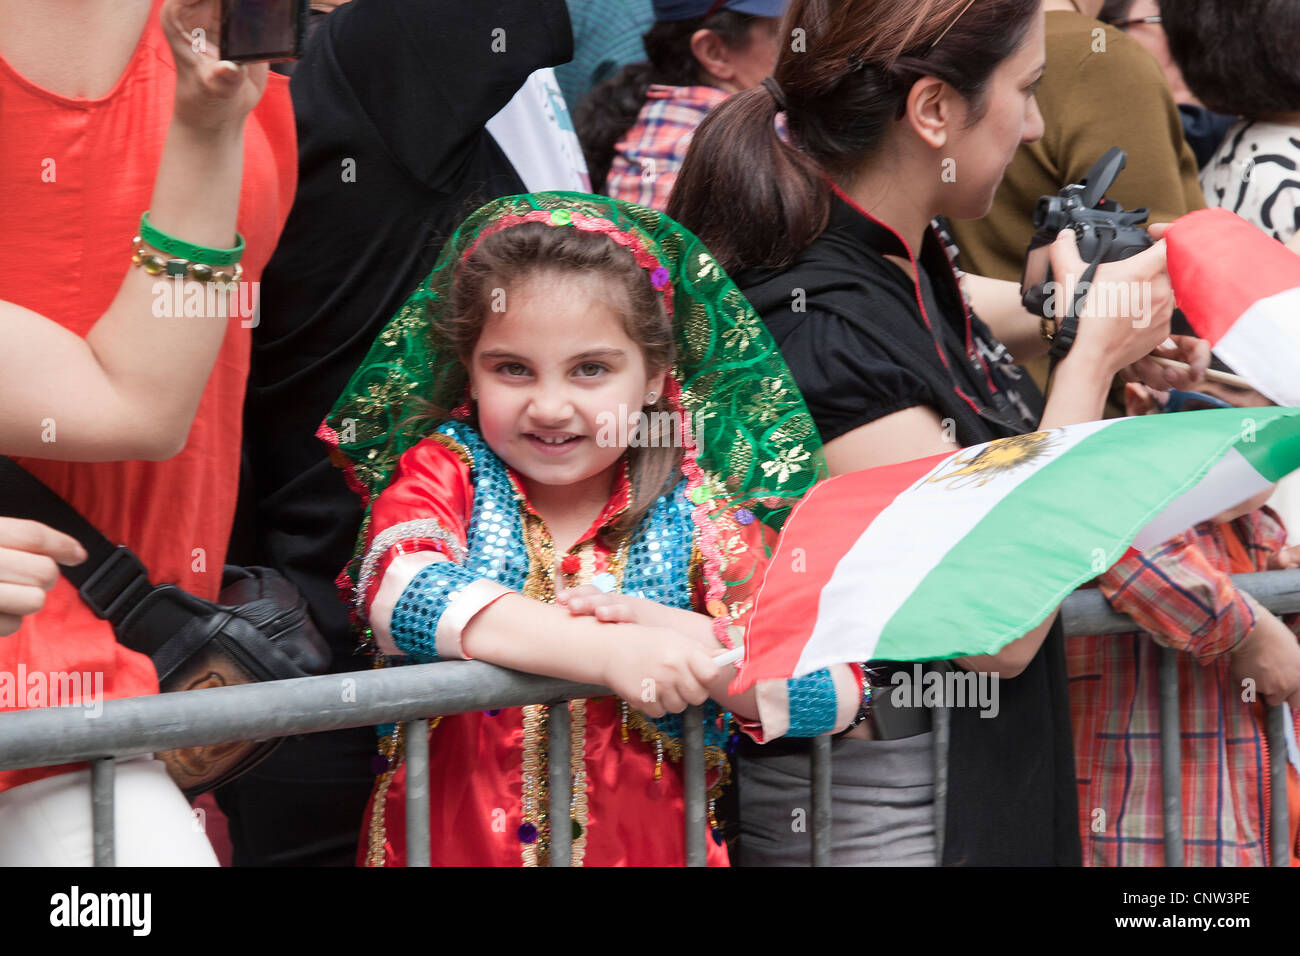 Iranian Americans celebrate the Persian New Year Nowruz with the annual